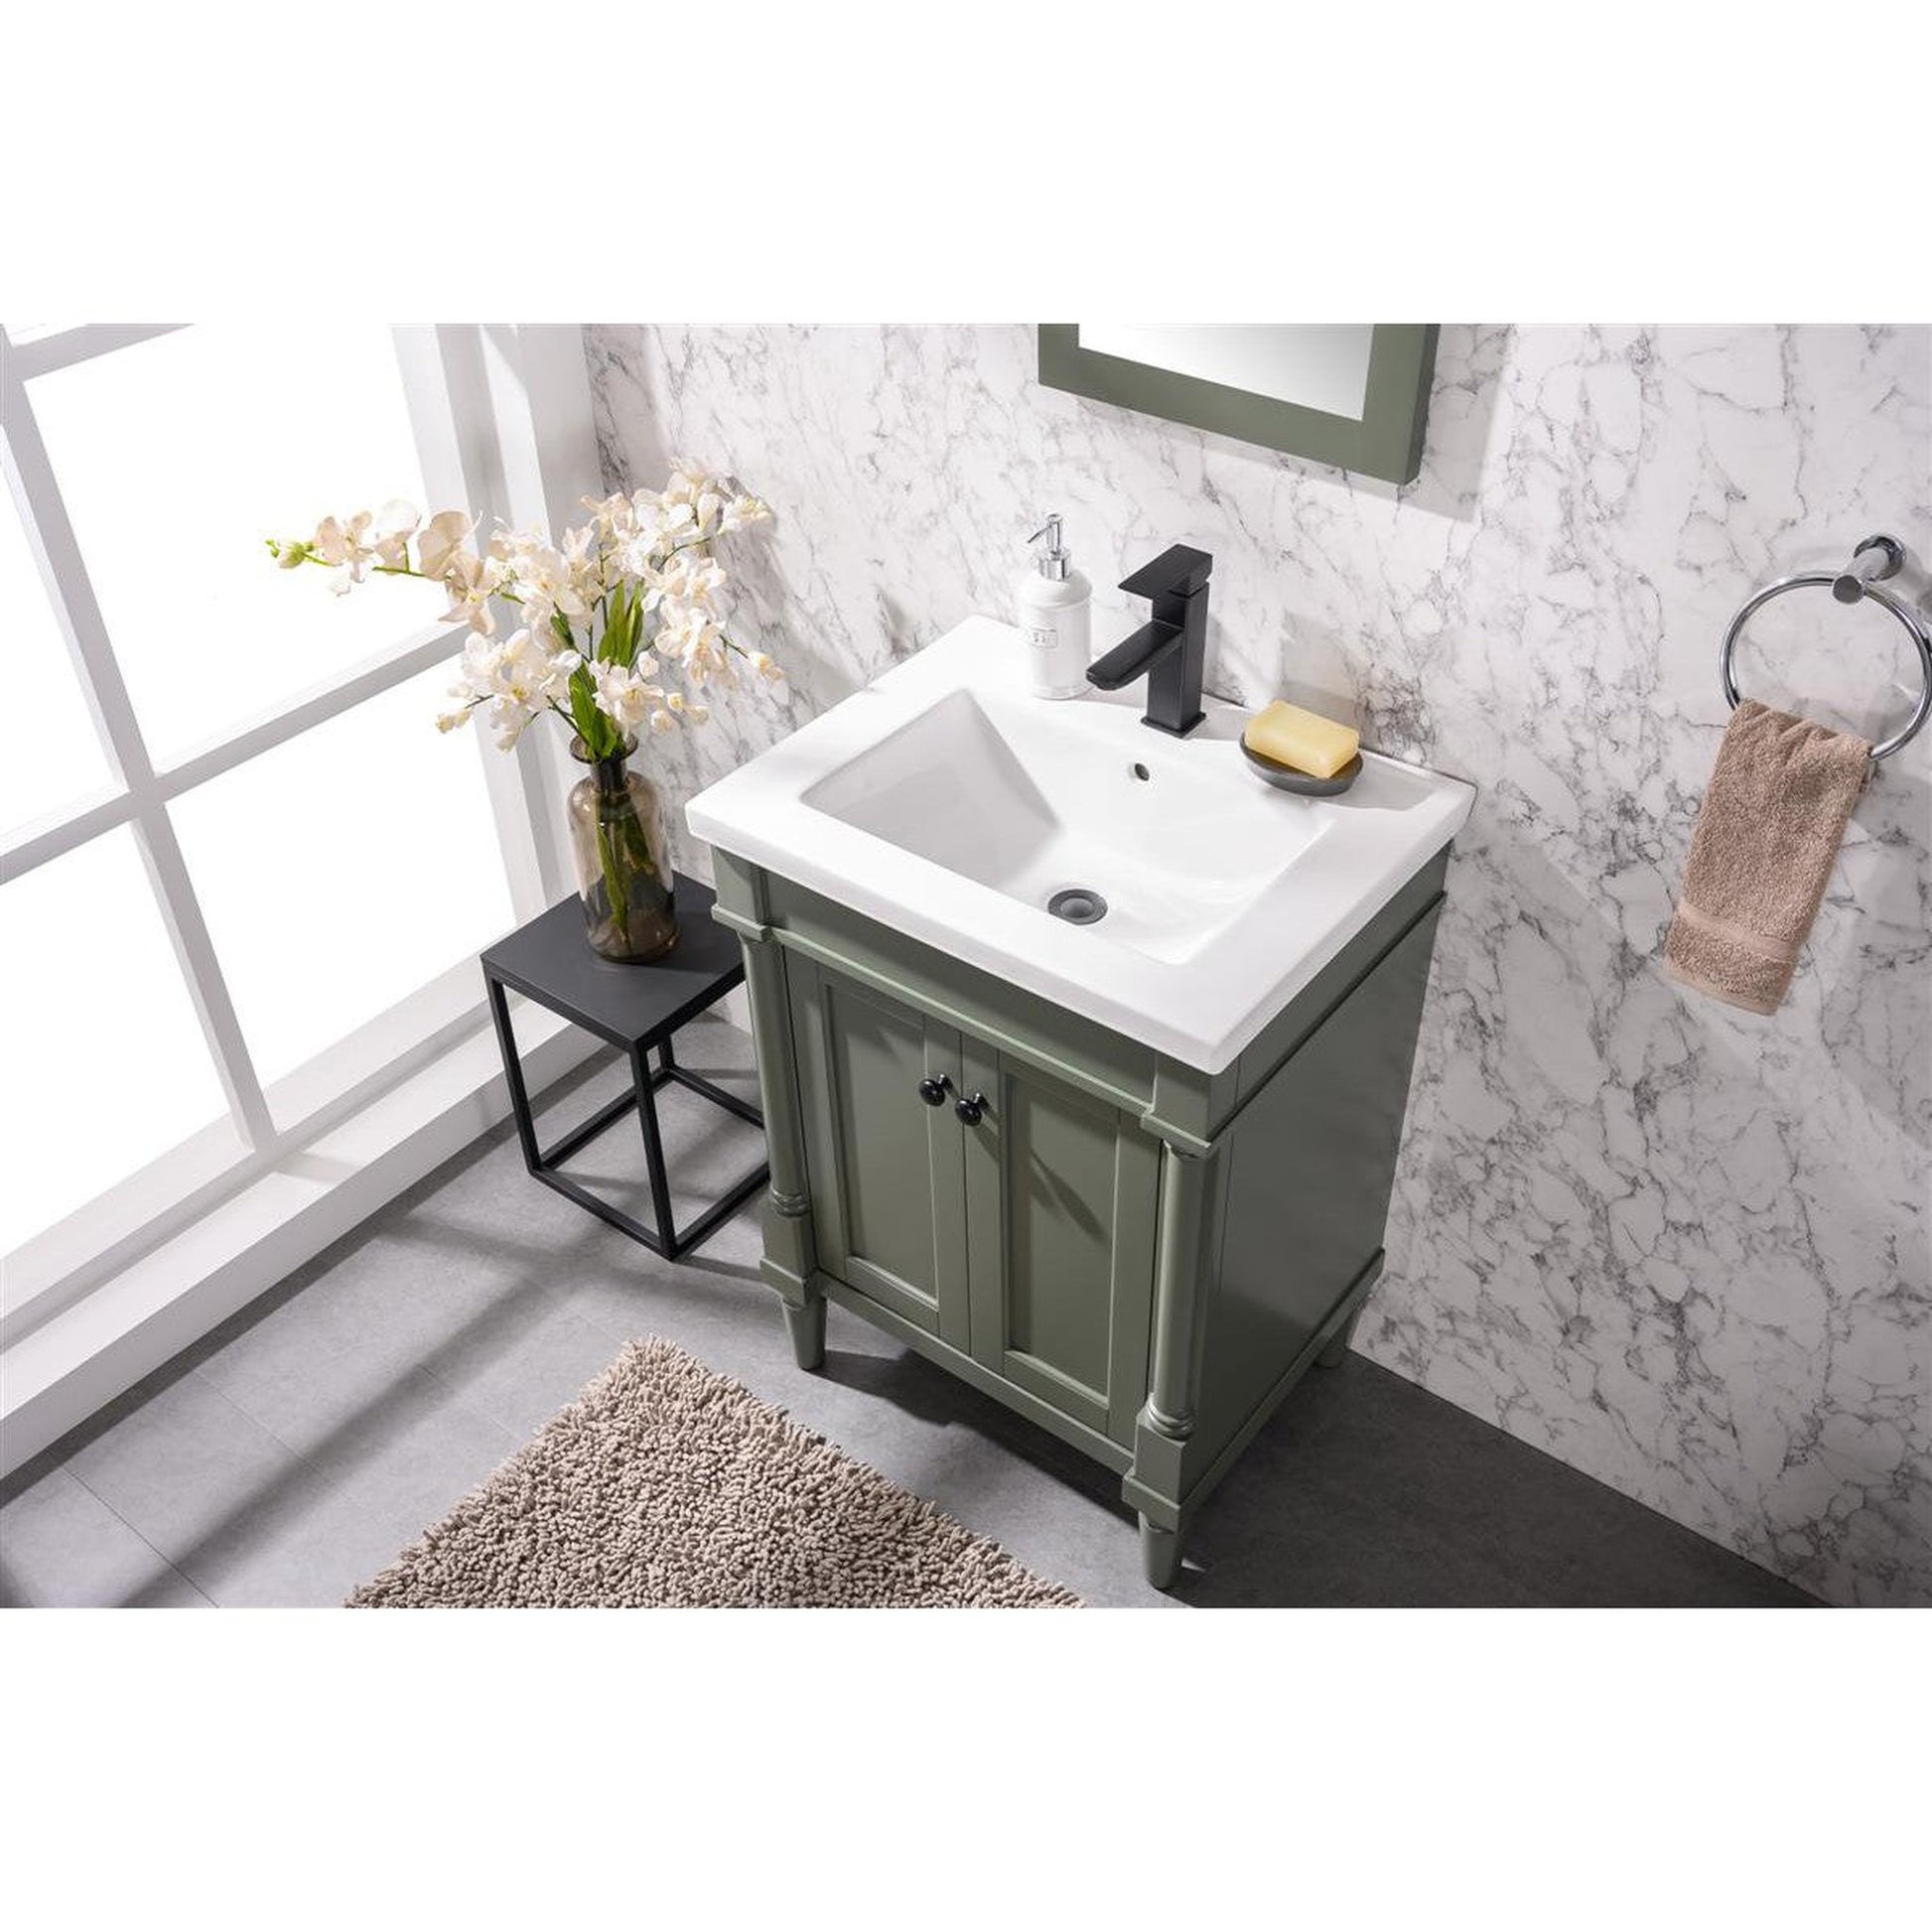 Legion Furniture WLF9224 24" Pewter Green Freestanding Vanity Cabinet With White Ceramic Top and Sink